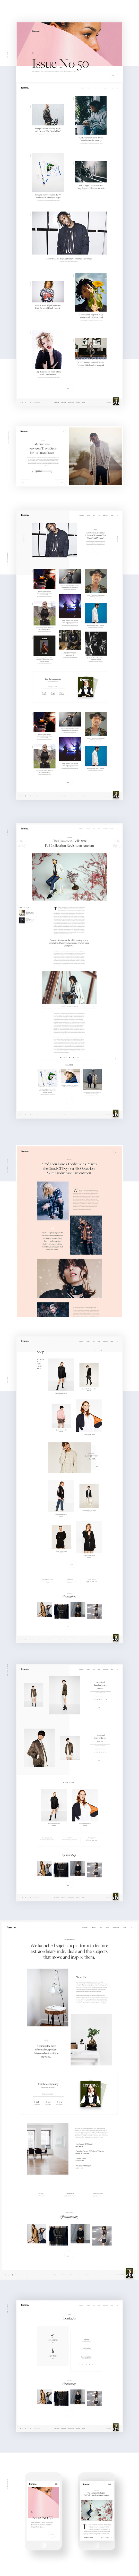 Ecommerce magazine editorial shop article typography   Layout grid Fashion  news